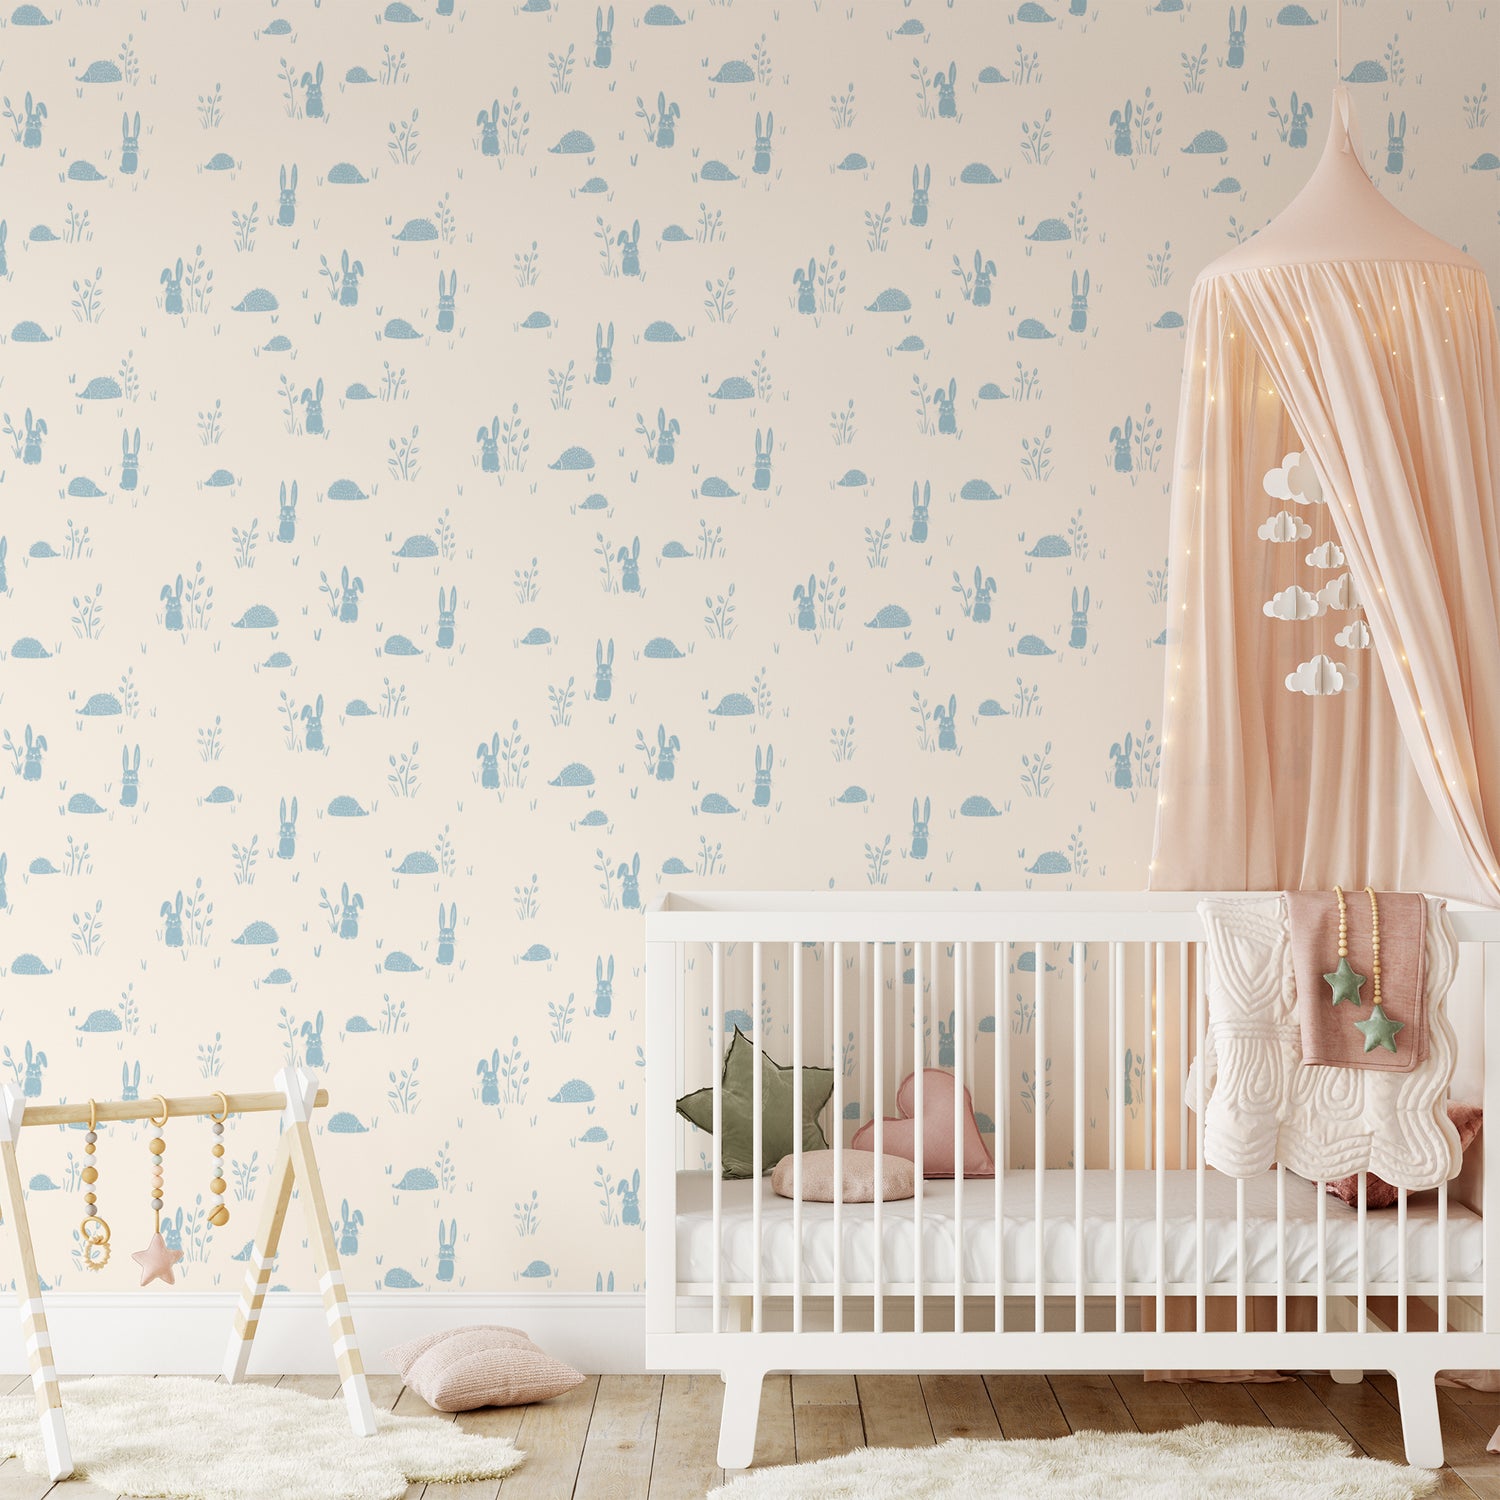 Hedgehogs and Rabbits Wallpaper in Blue shown in a nursery. 